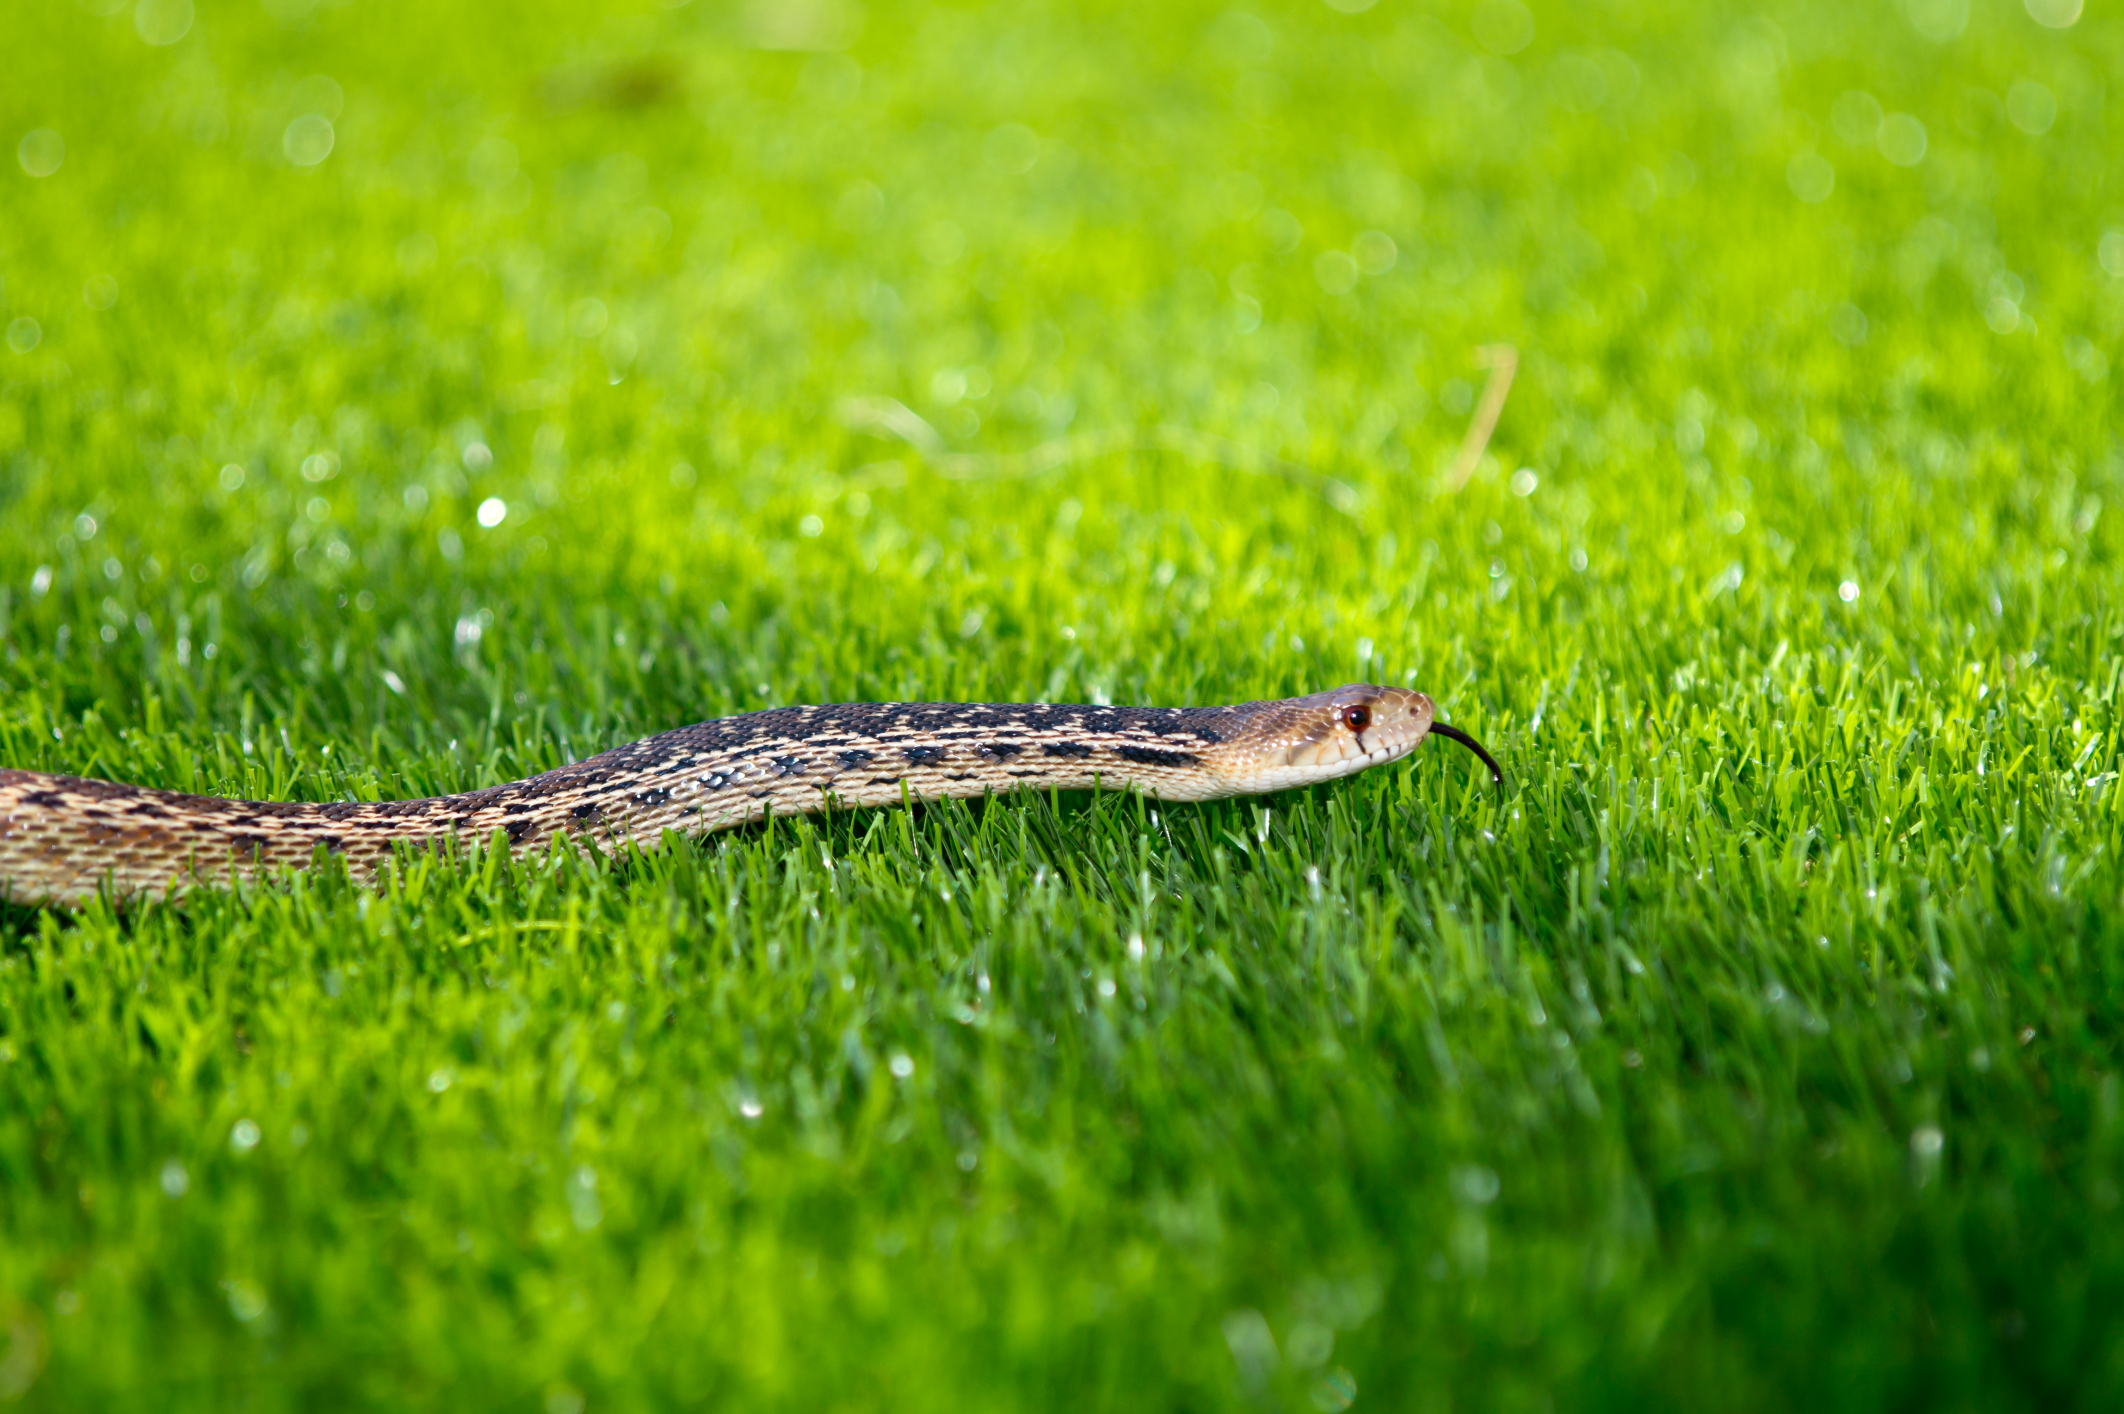 Benefits Of Using Sulfur To Kill Snakes